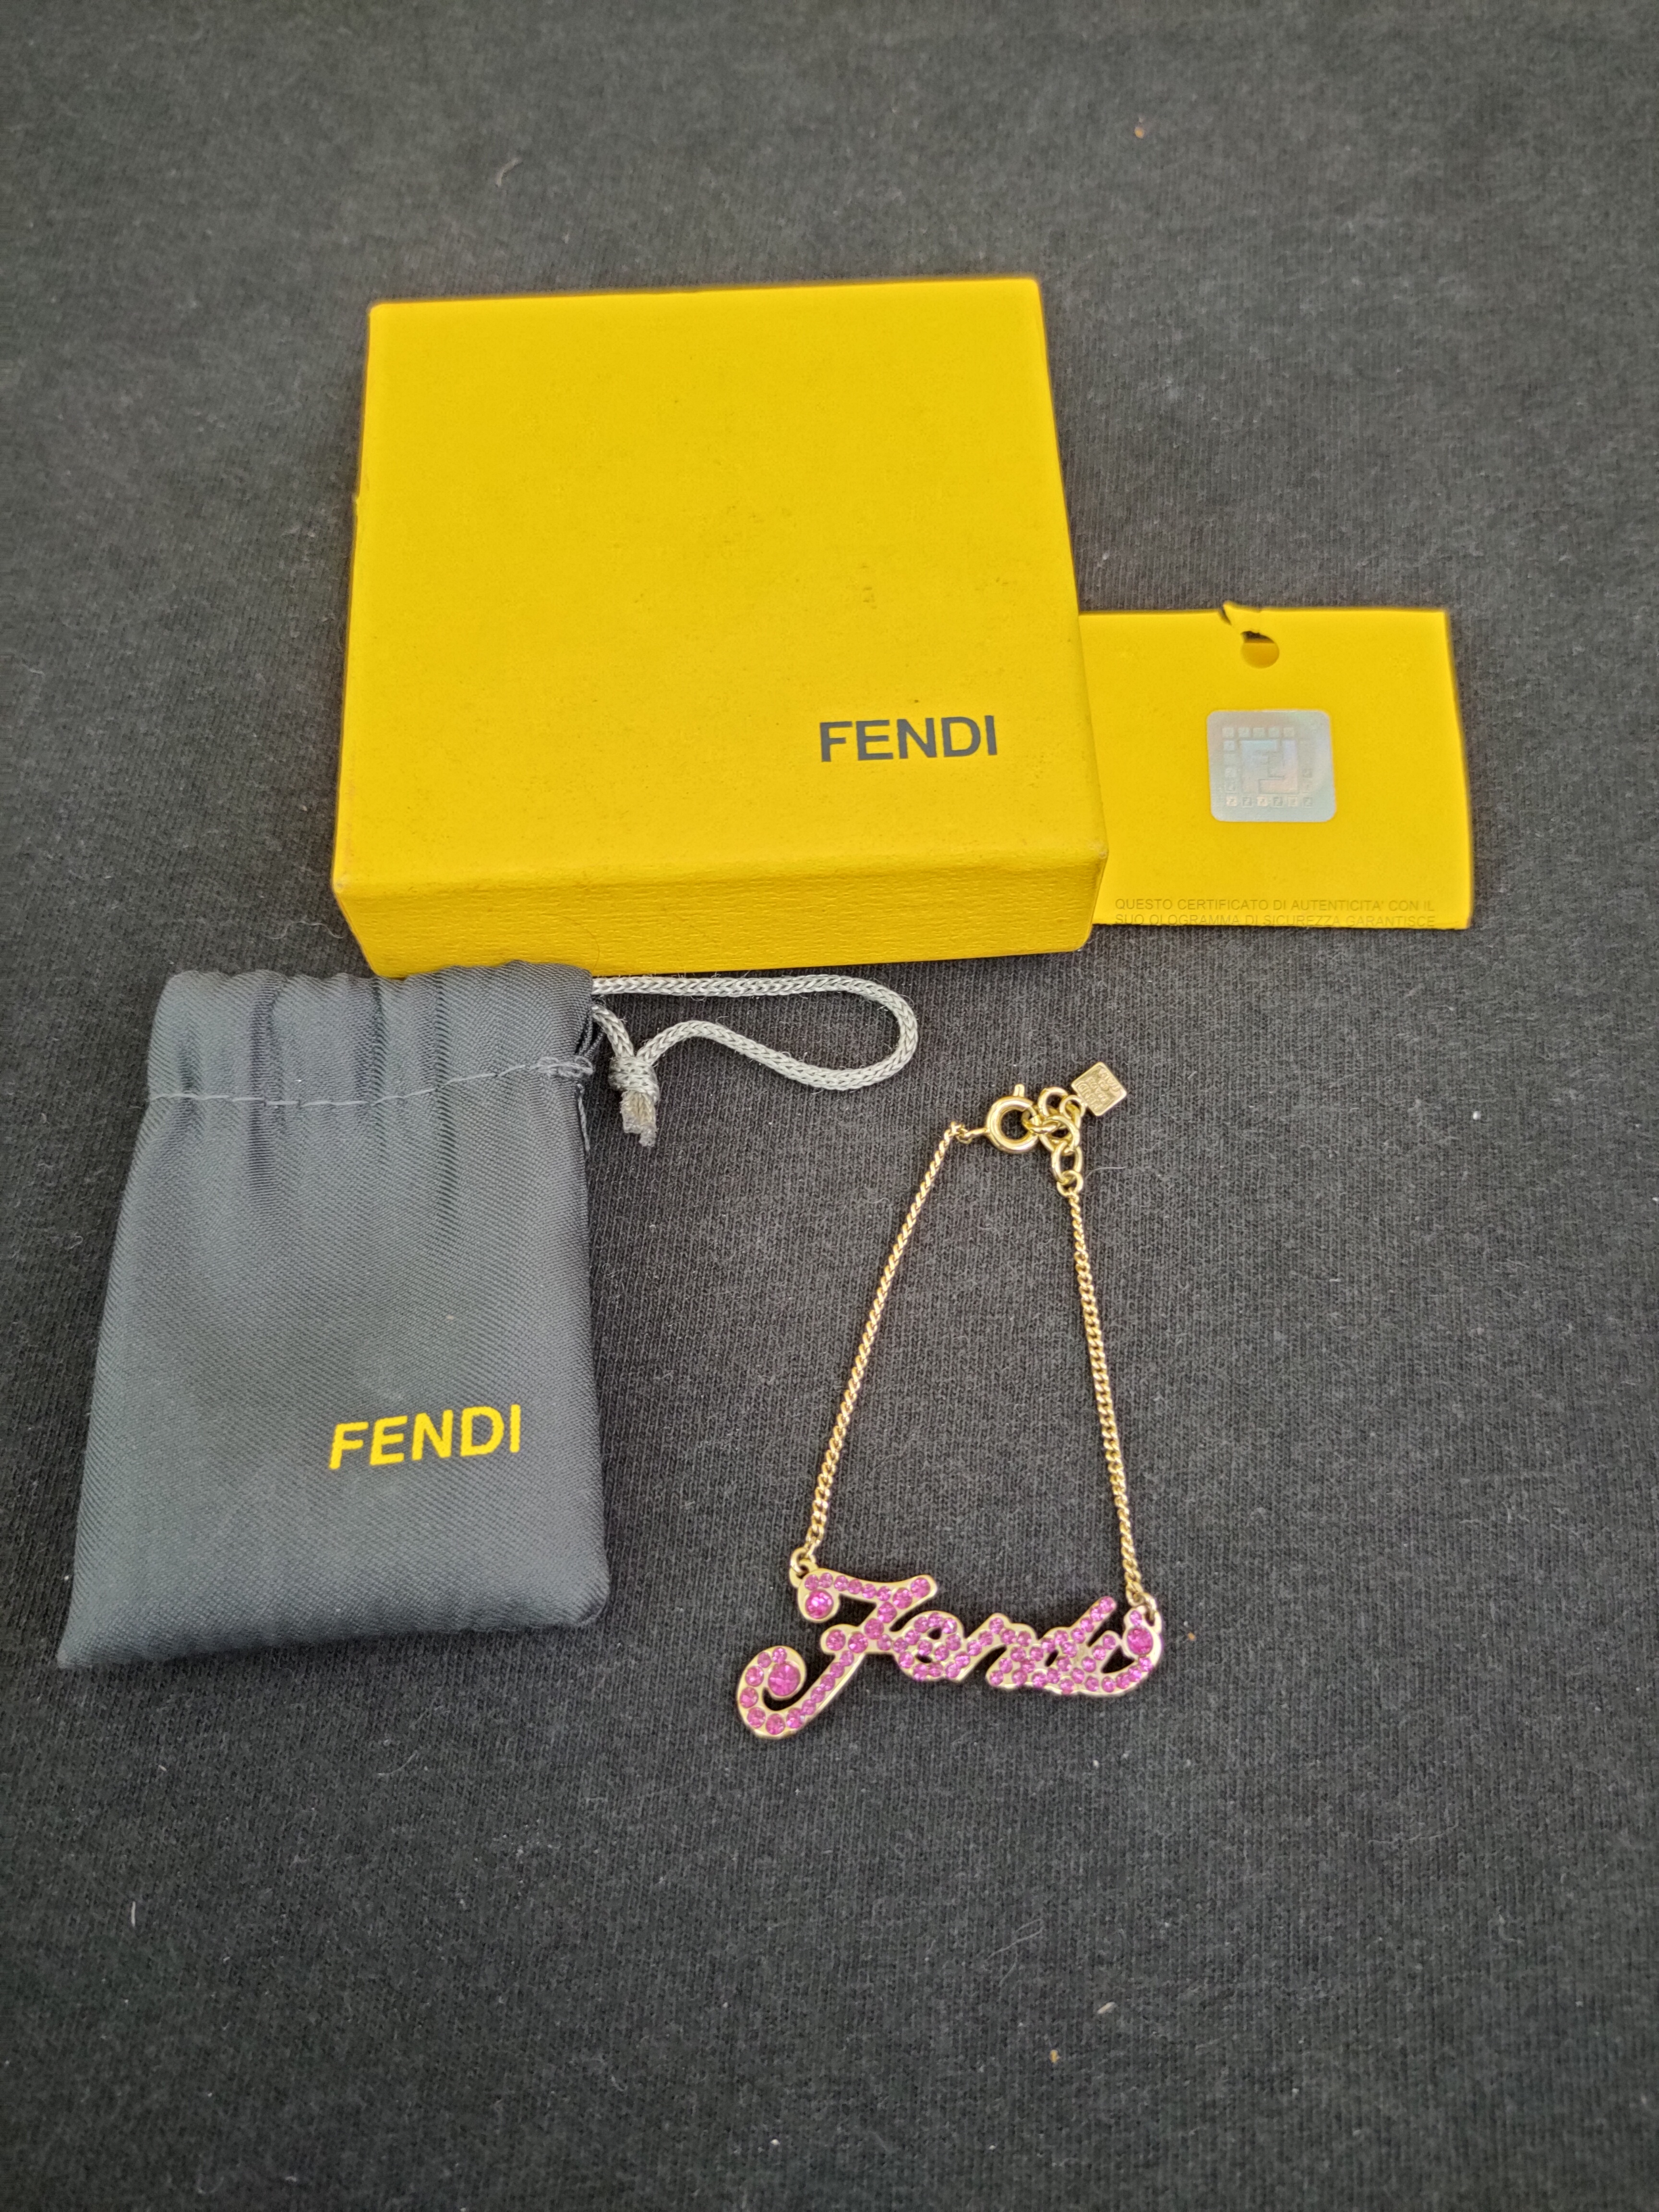 Fendi Bracelet Pink spell-out rhinestone necklace with box - 3